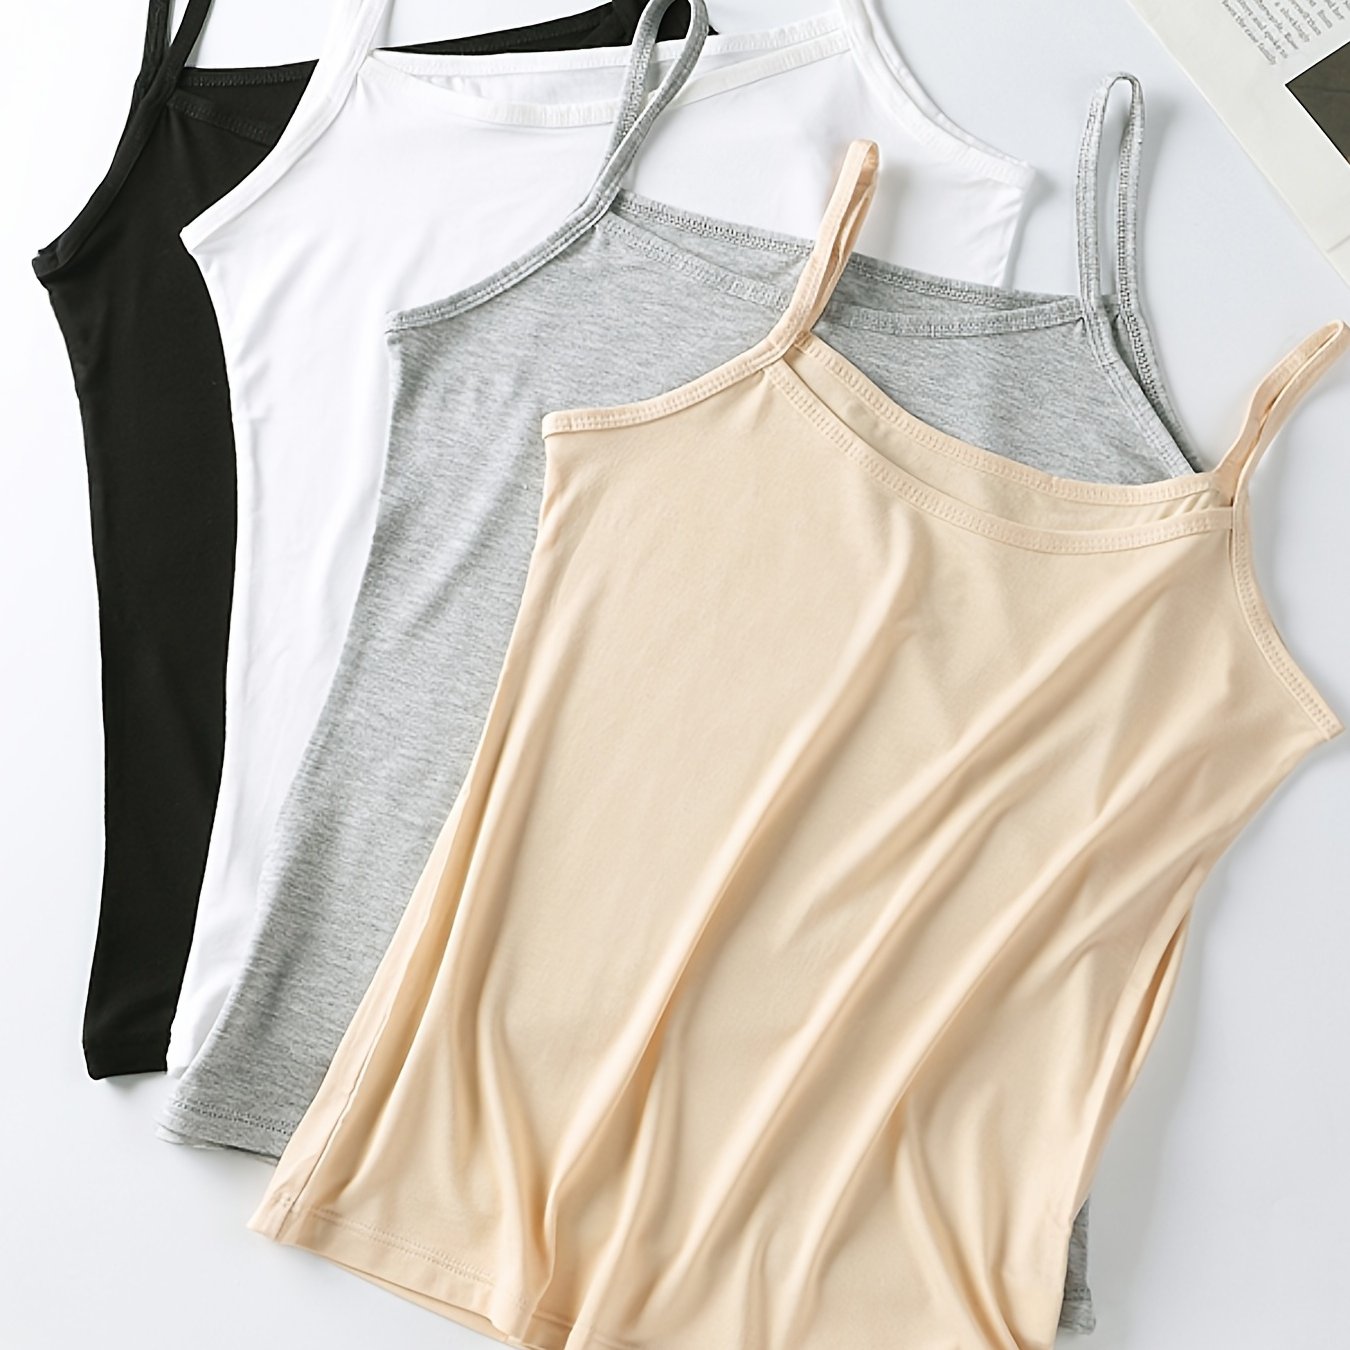 Discover Comfort & Style with Our Buttery Soft Camisole Tank